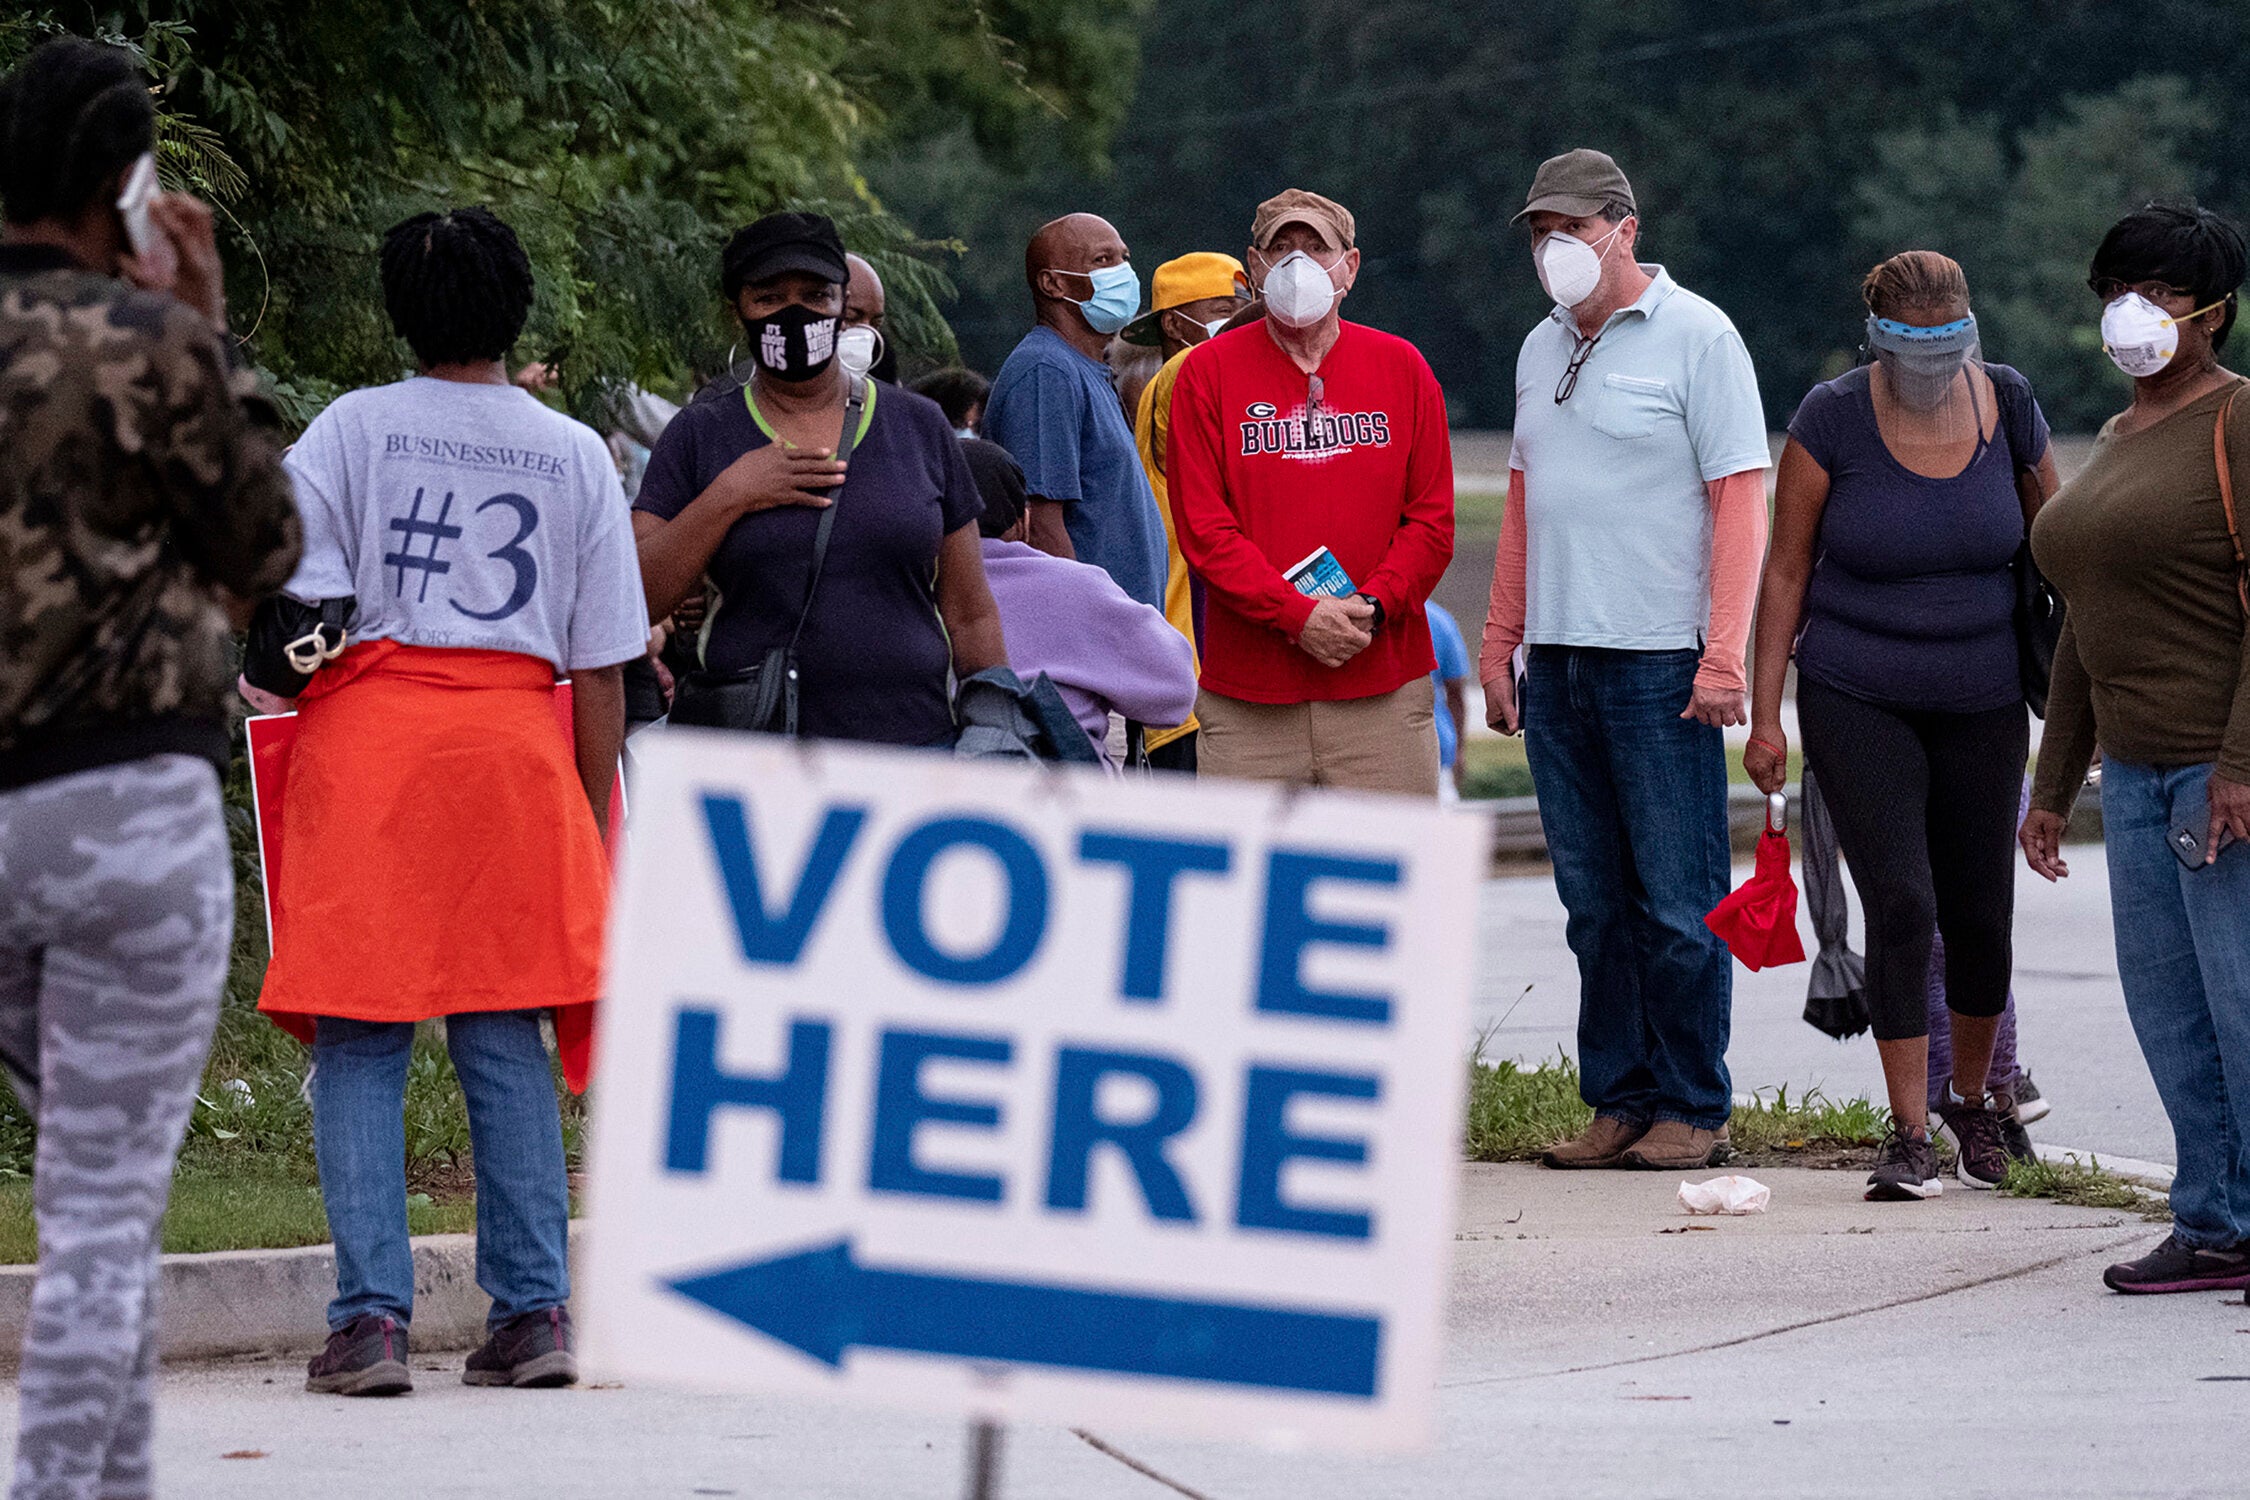 People wait in line to vote in Decatur, Ga., Monday, Oct. 12, 2020